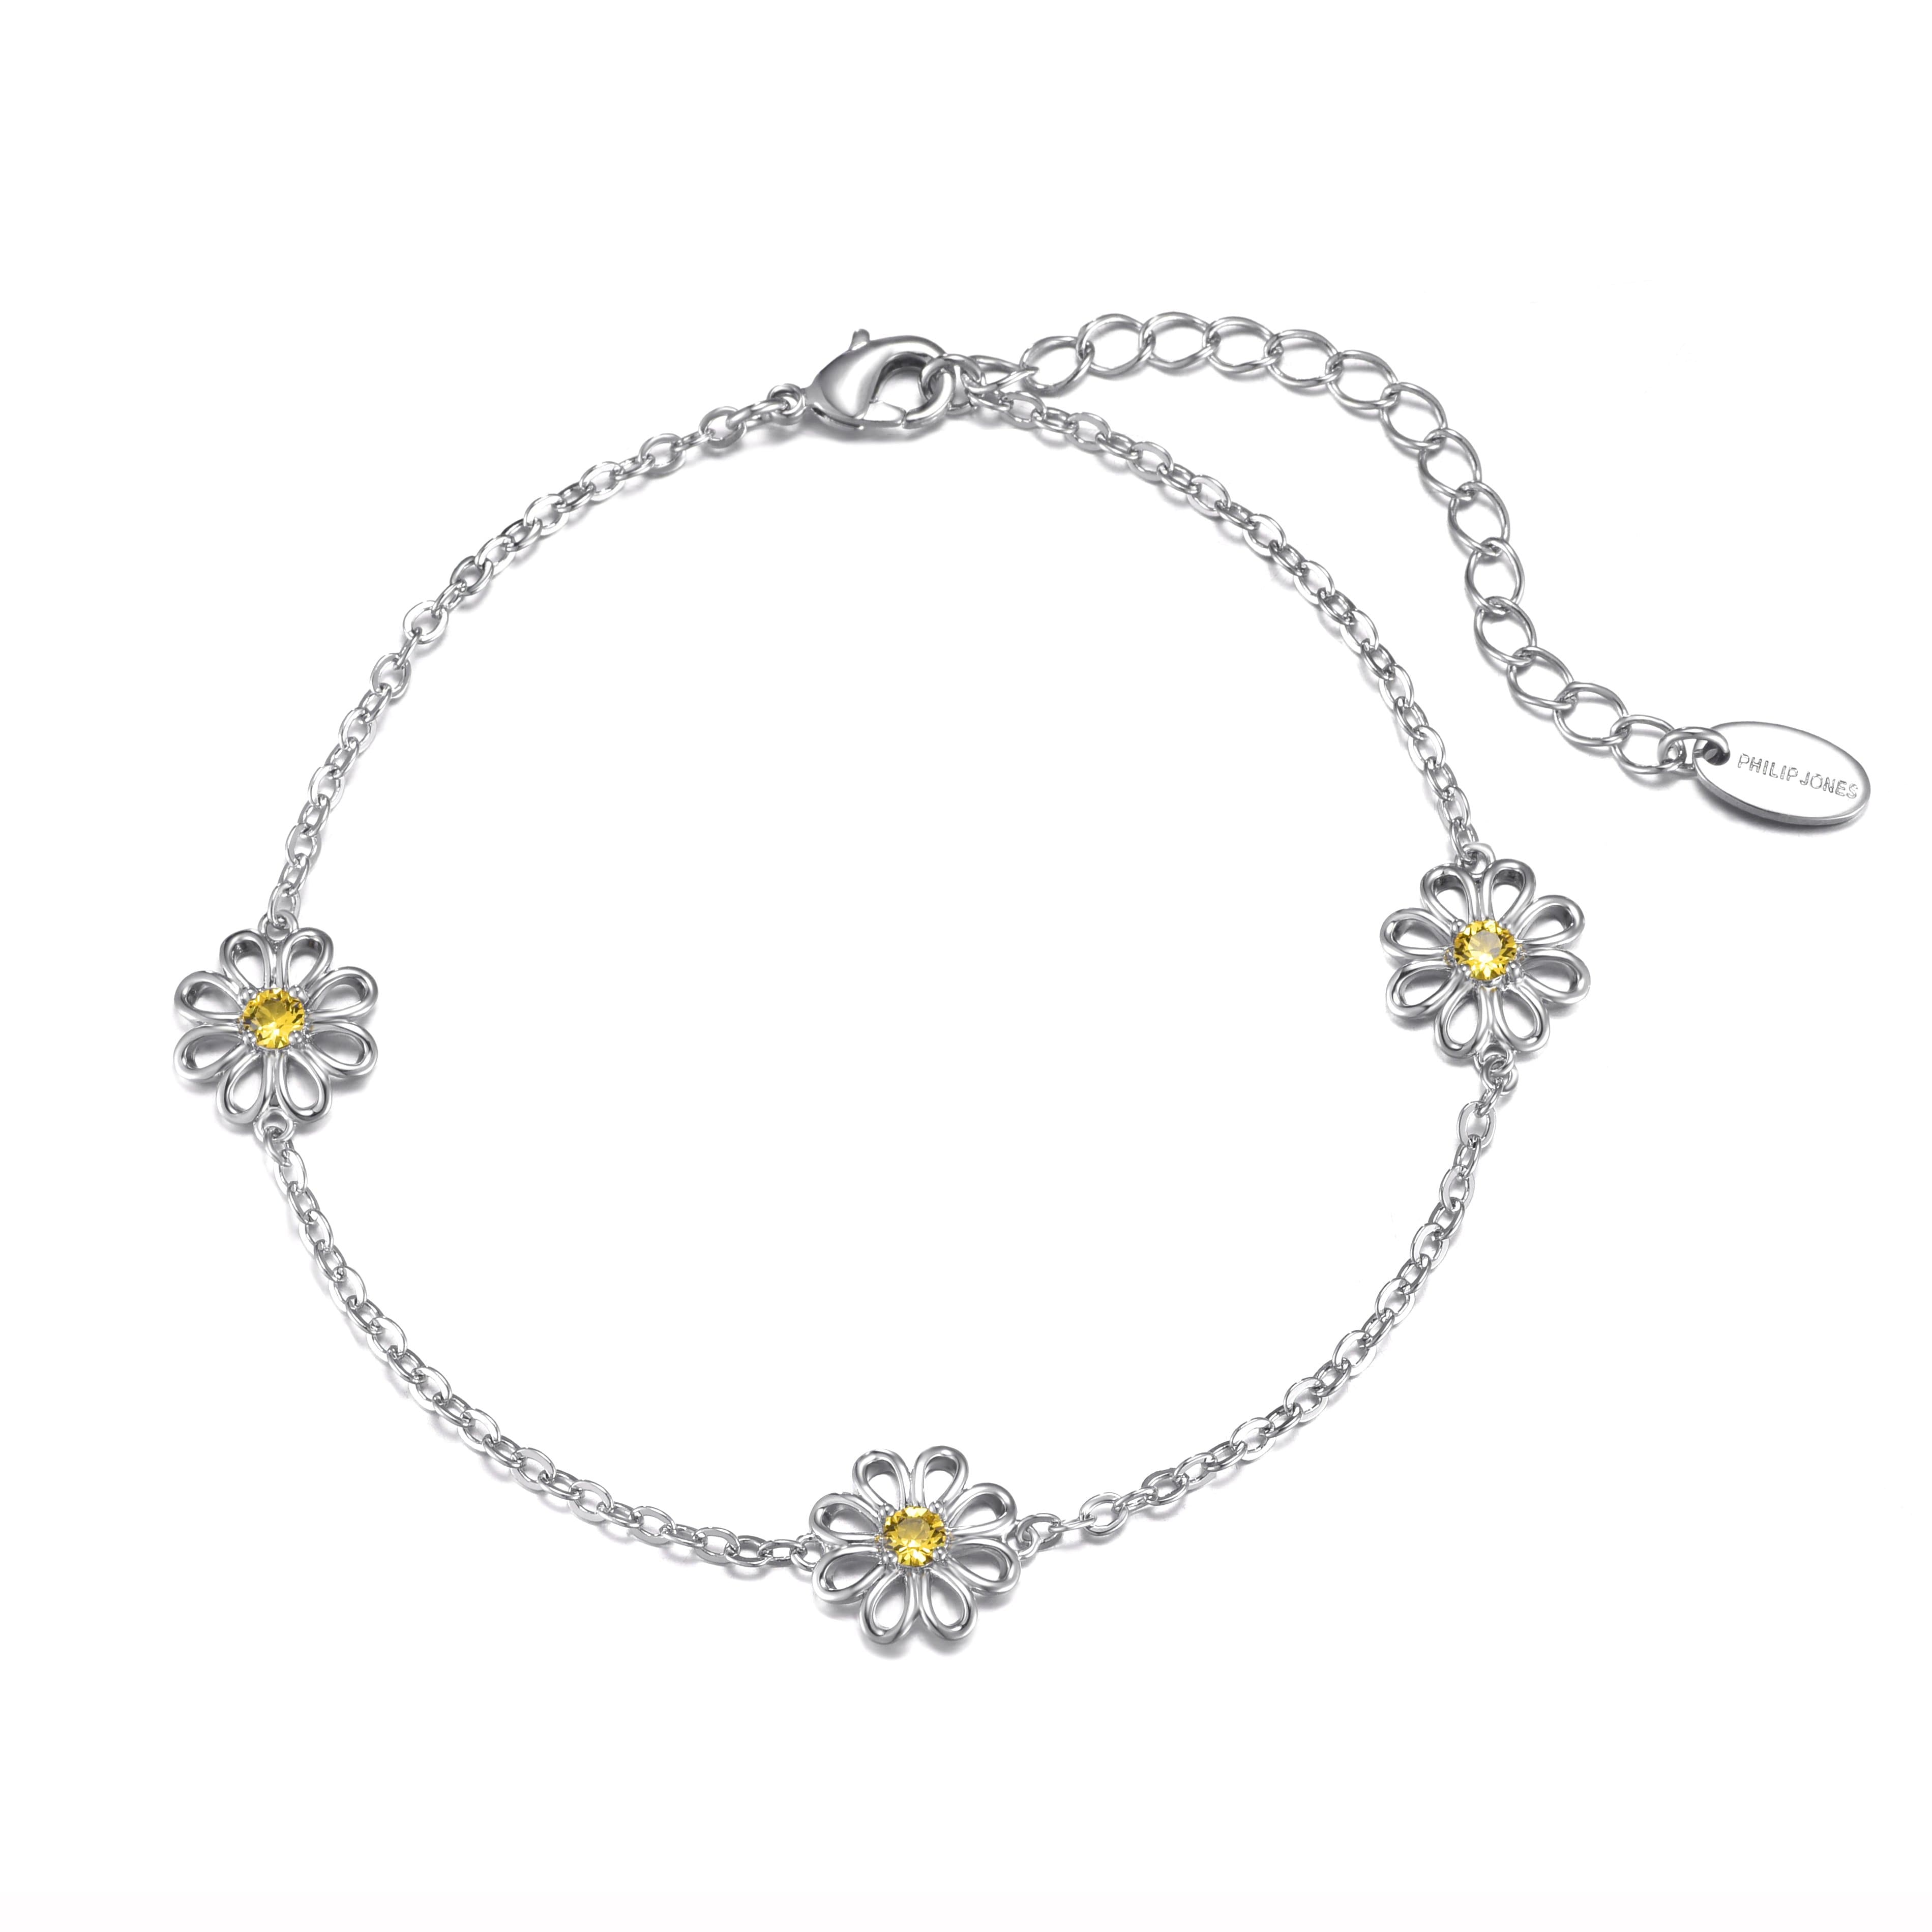 Crystal Daisy Anklet Created with Zircondia® Crystals by Philip Jones Jewellery